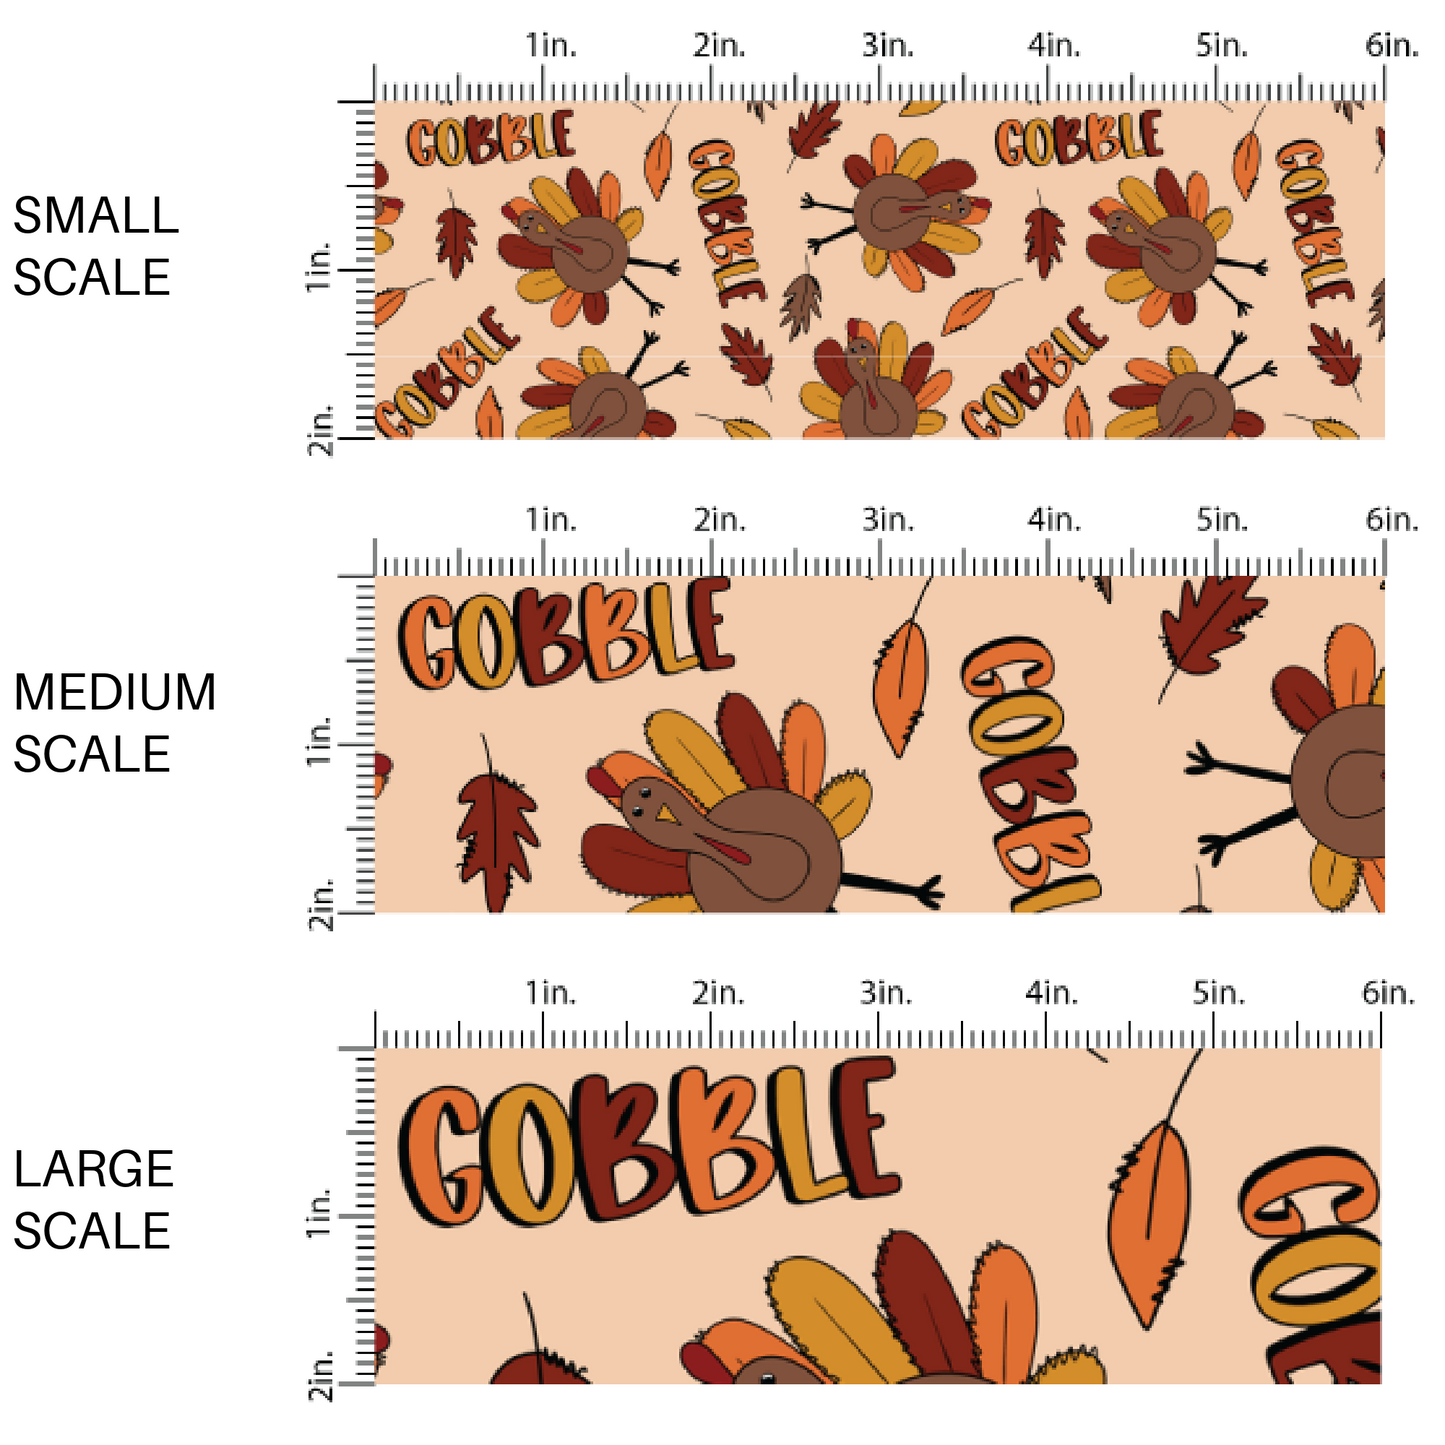 Tan fabric by the yard scaled image guide  with the phrase "Gobble" and a Turkey.